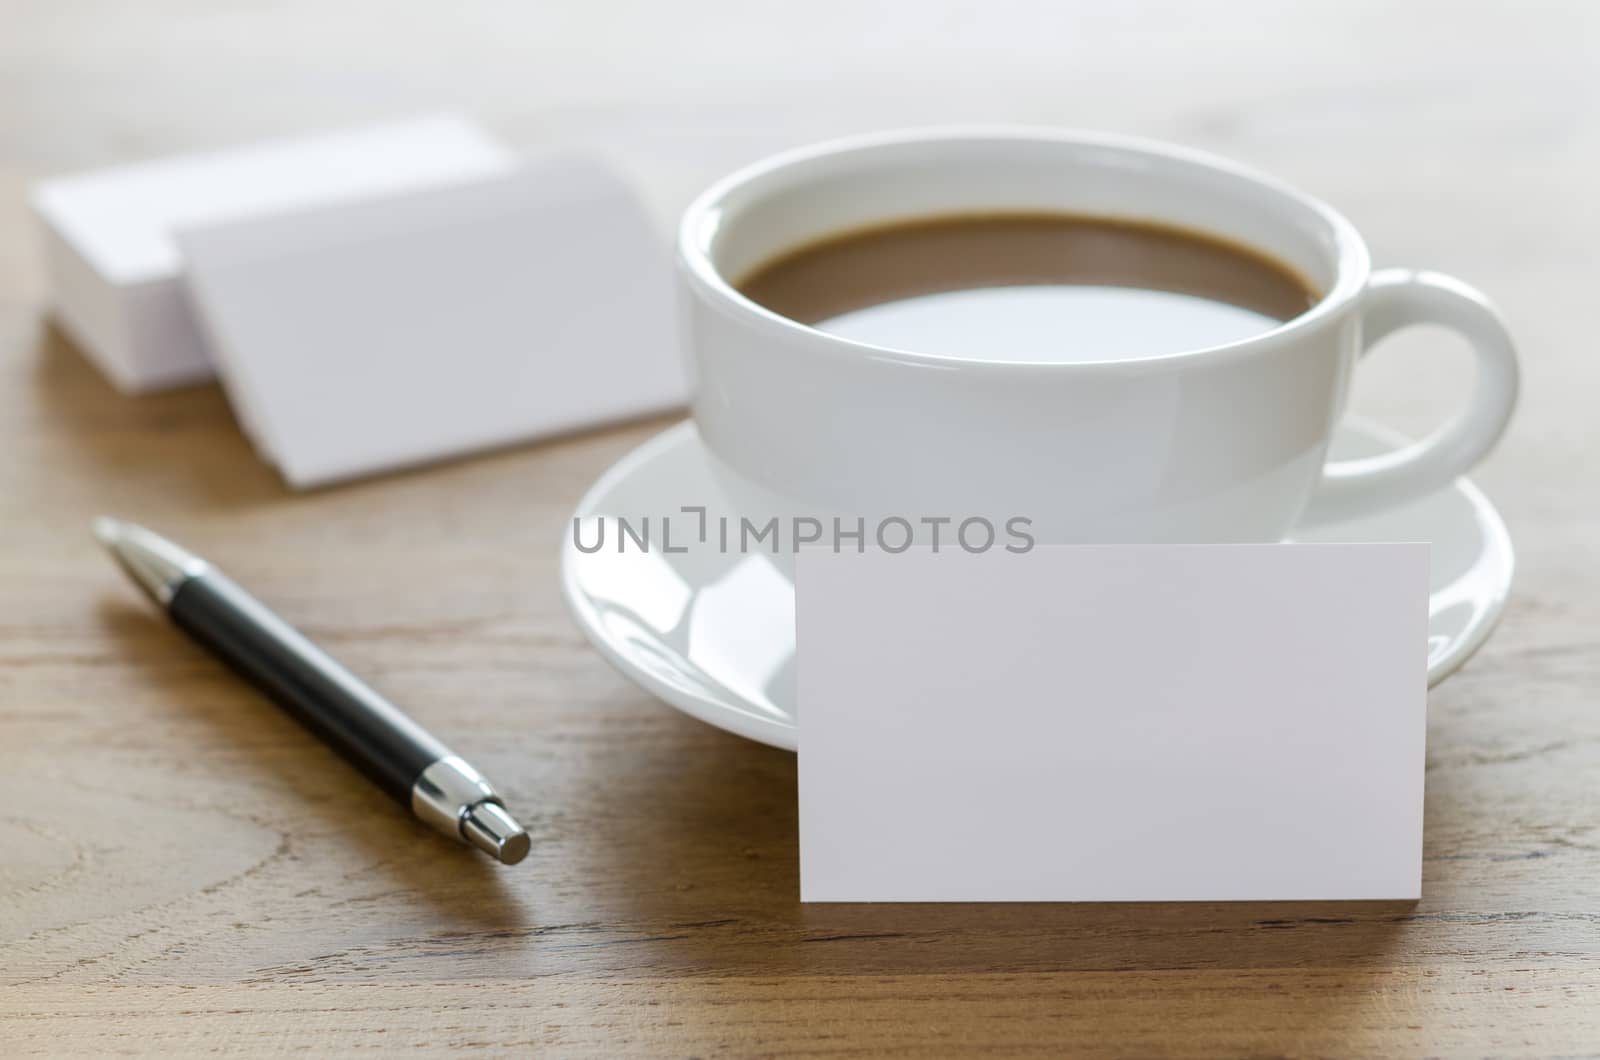 Blank business cards, pen and cup of coffee on wooden table.  by koson